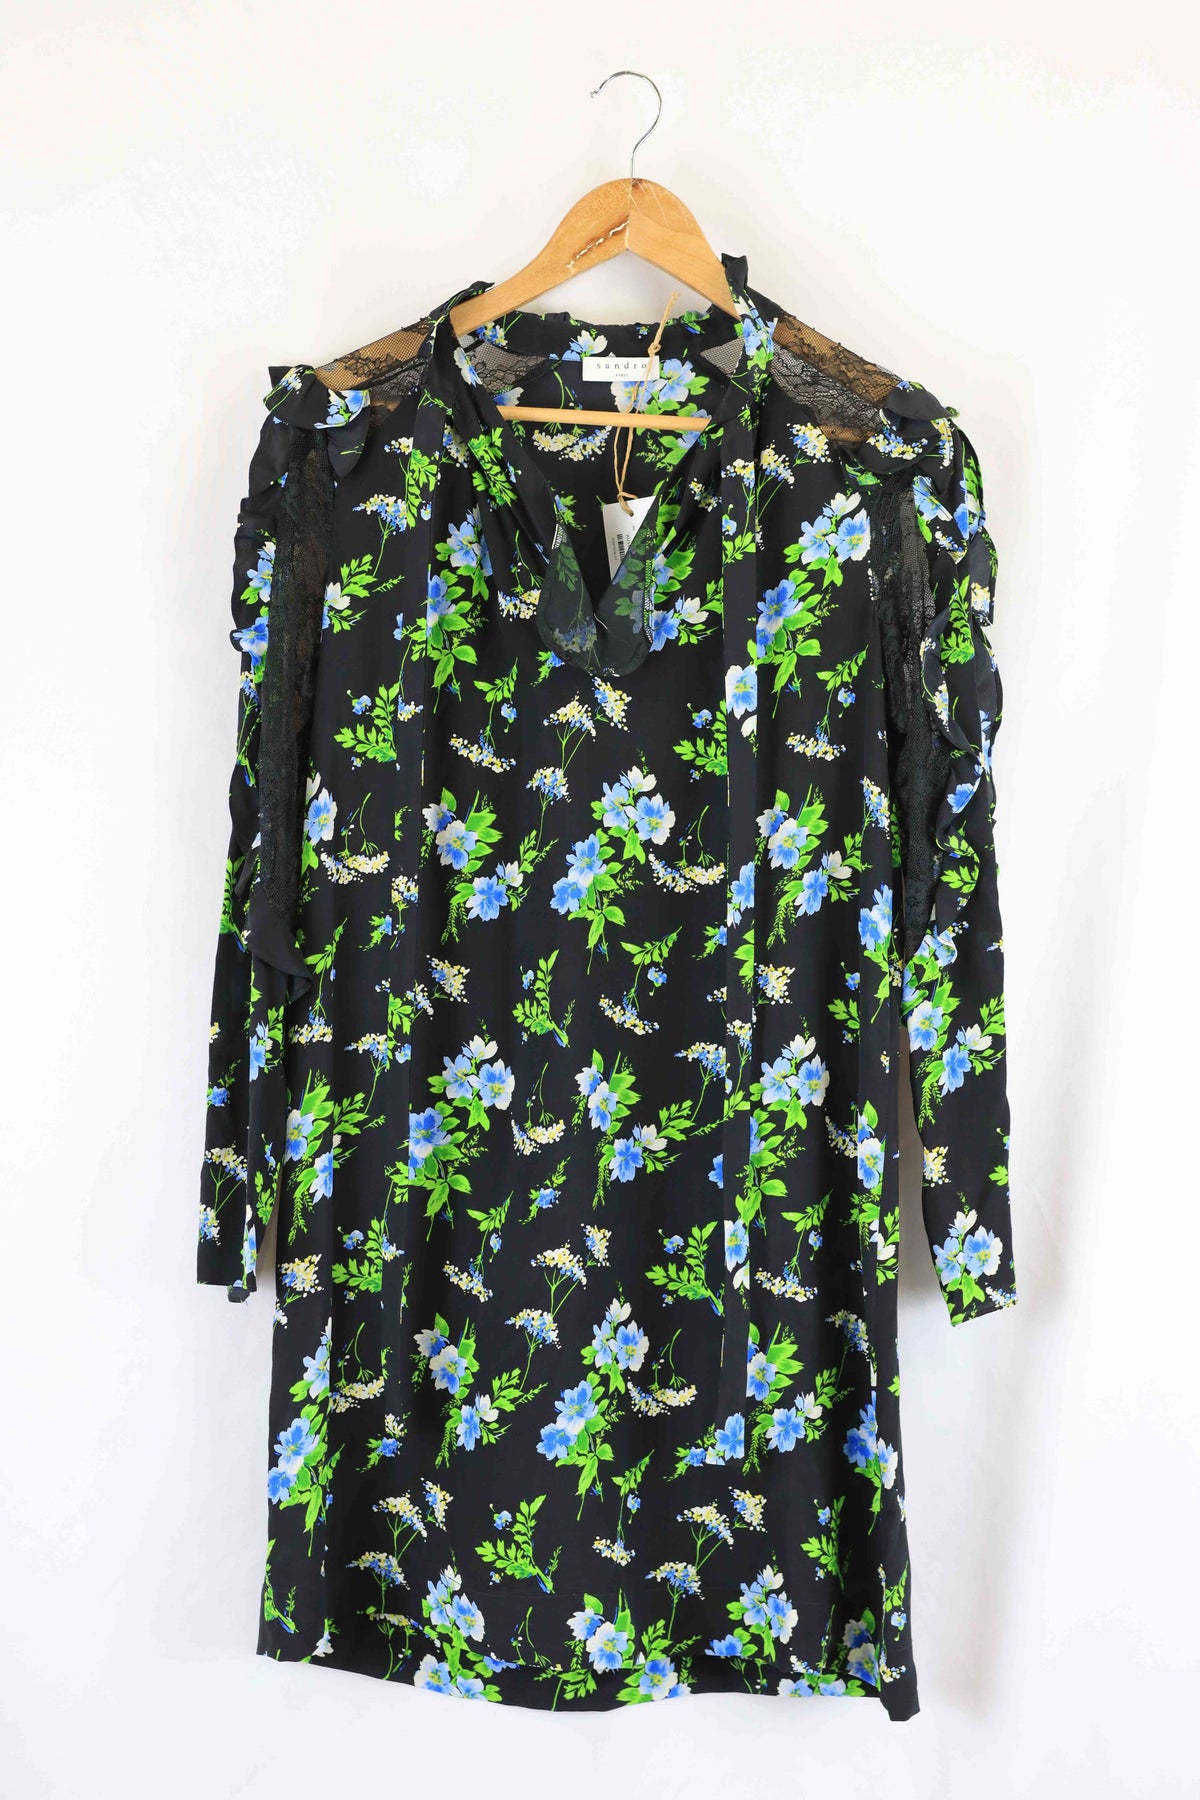 Sandro Black And Green Floral Dress M